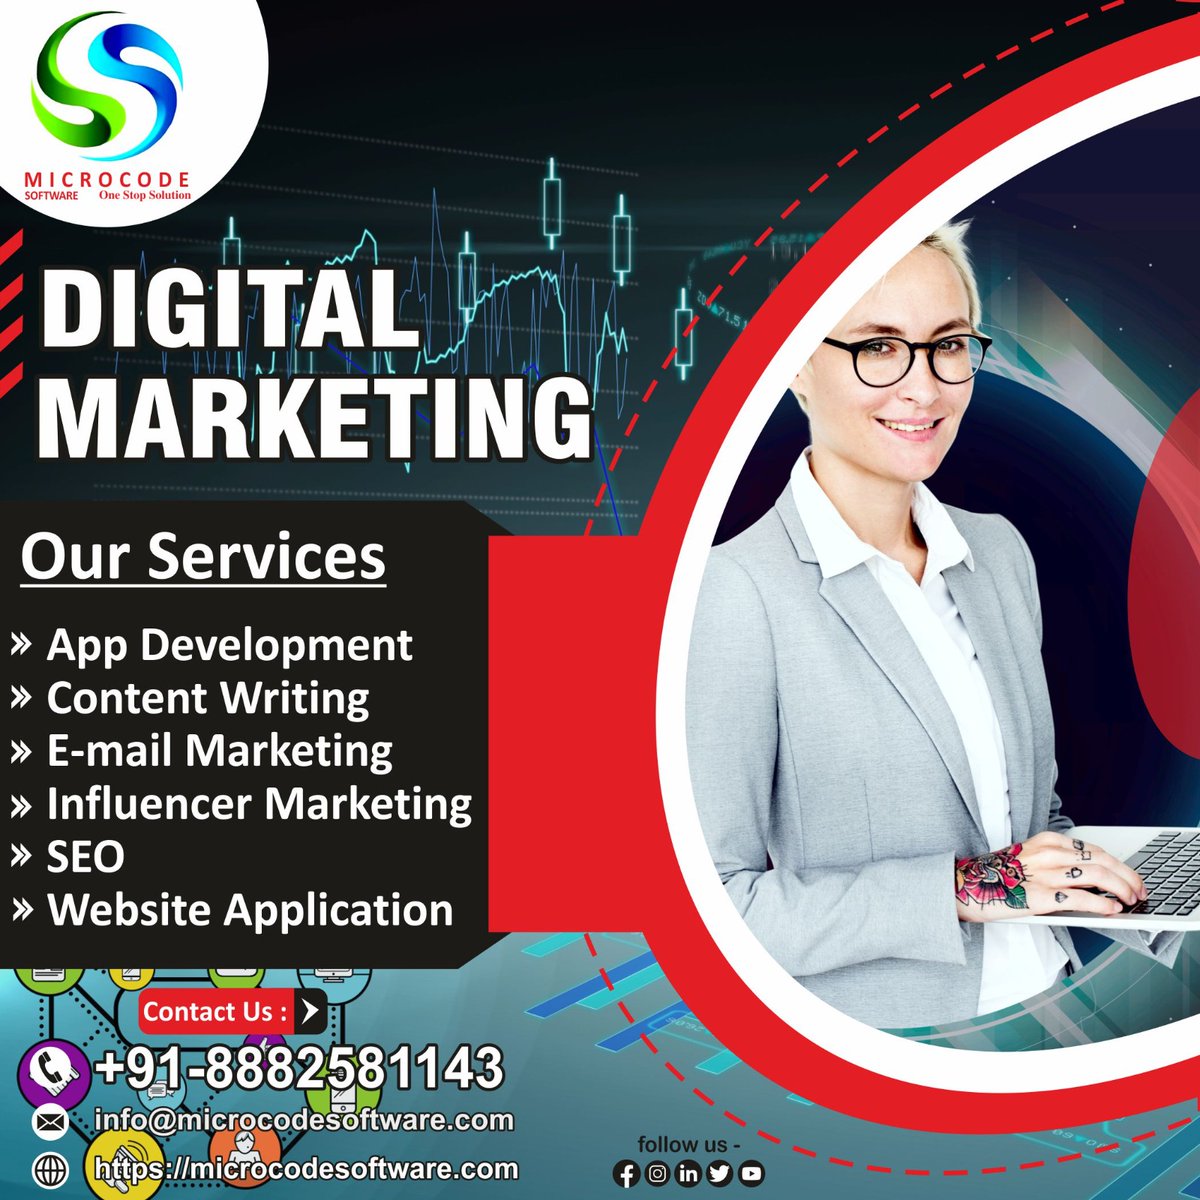 Microcode Software...… Stop Solution for all needs. Get connected with our expert 24*7..... Microcode Software
#digitalmarketingexpert #emailmarketing #microcodesoftware #Microsoft #appdevelopment #marketingsoftware #contentmarketing #emailmarketingsoftware #digitalmarketing